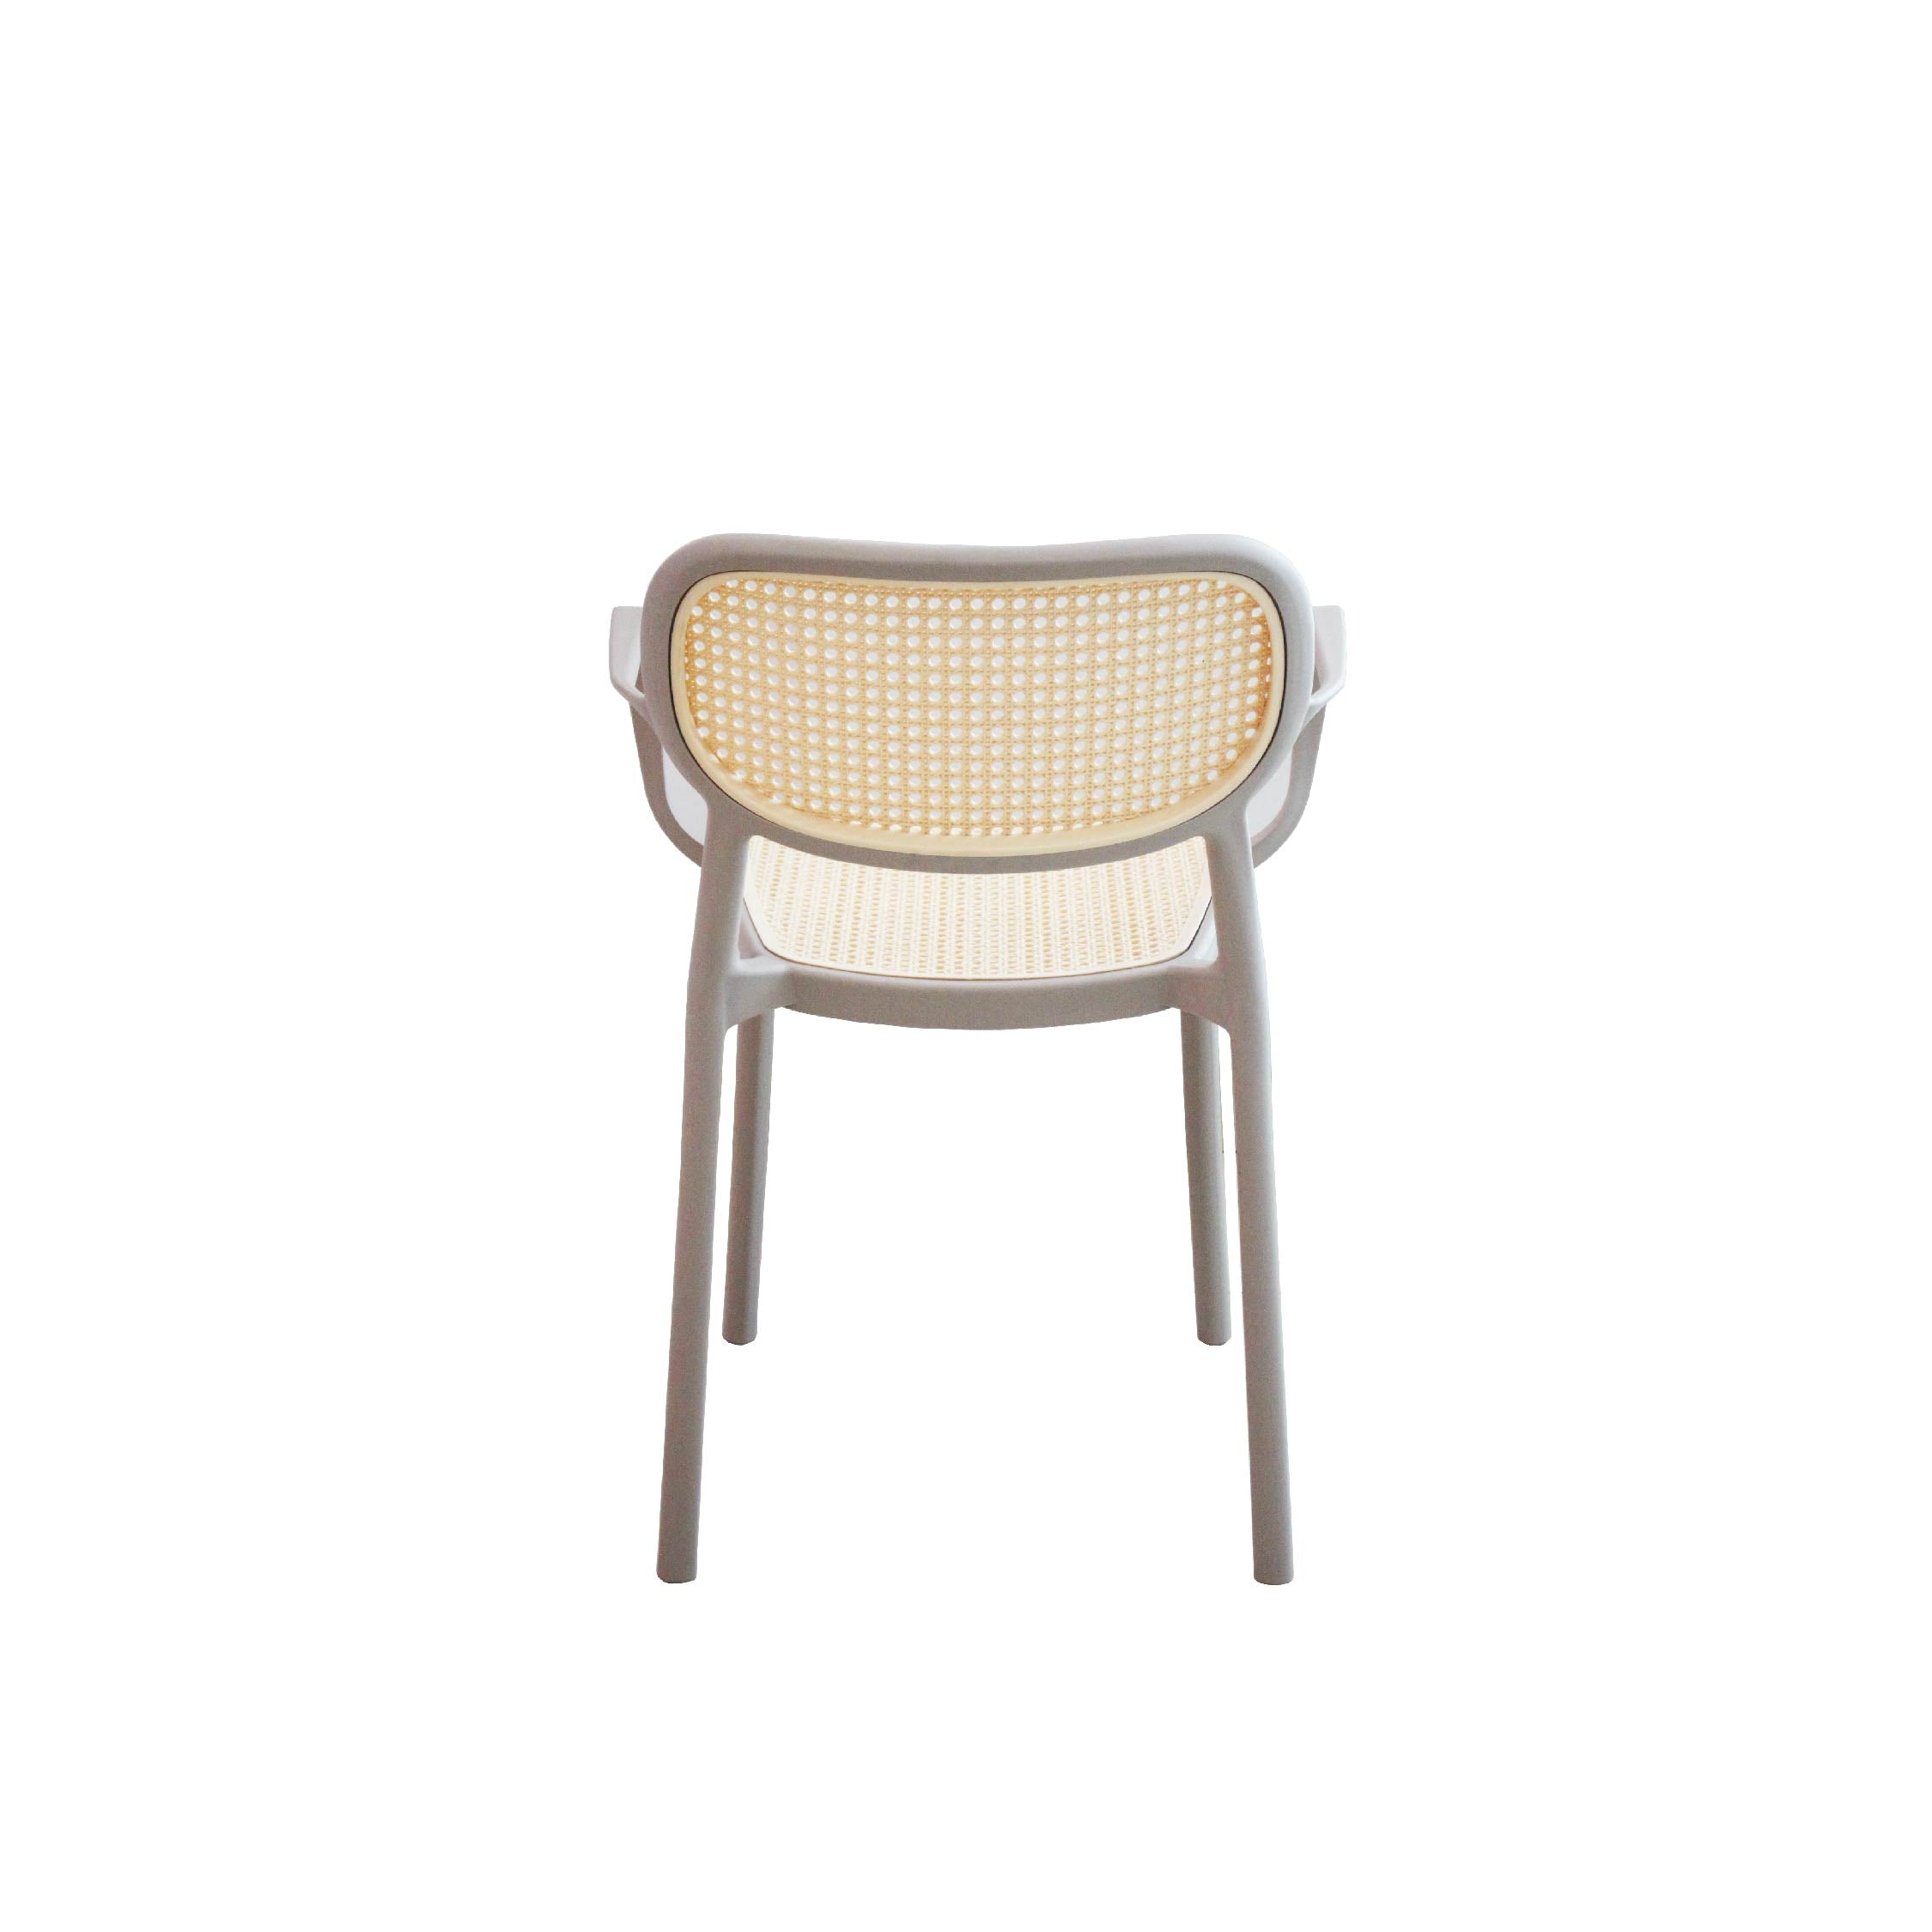 PATI Chair 868 with Arm